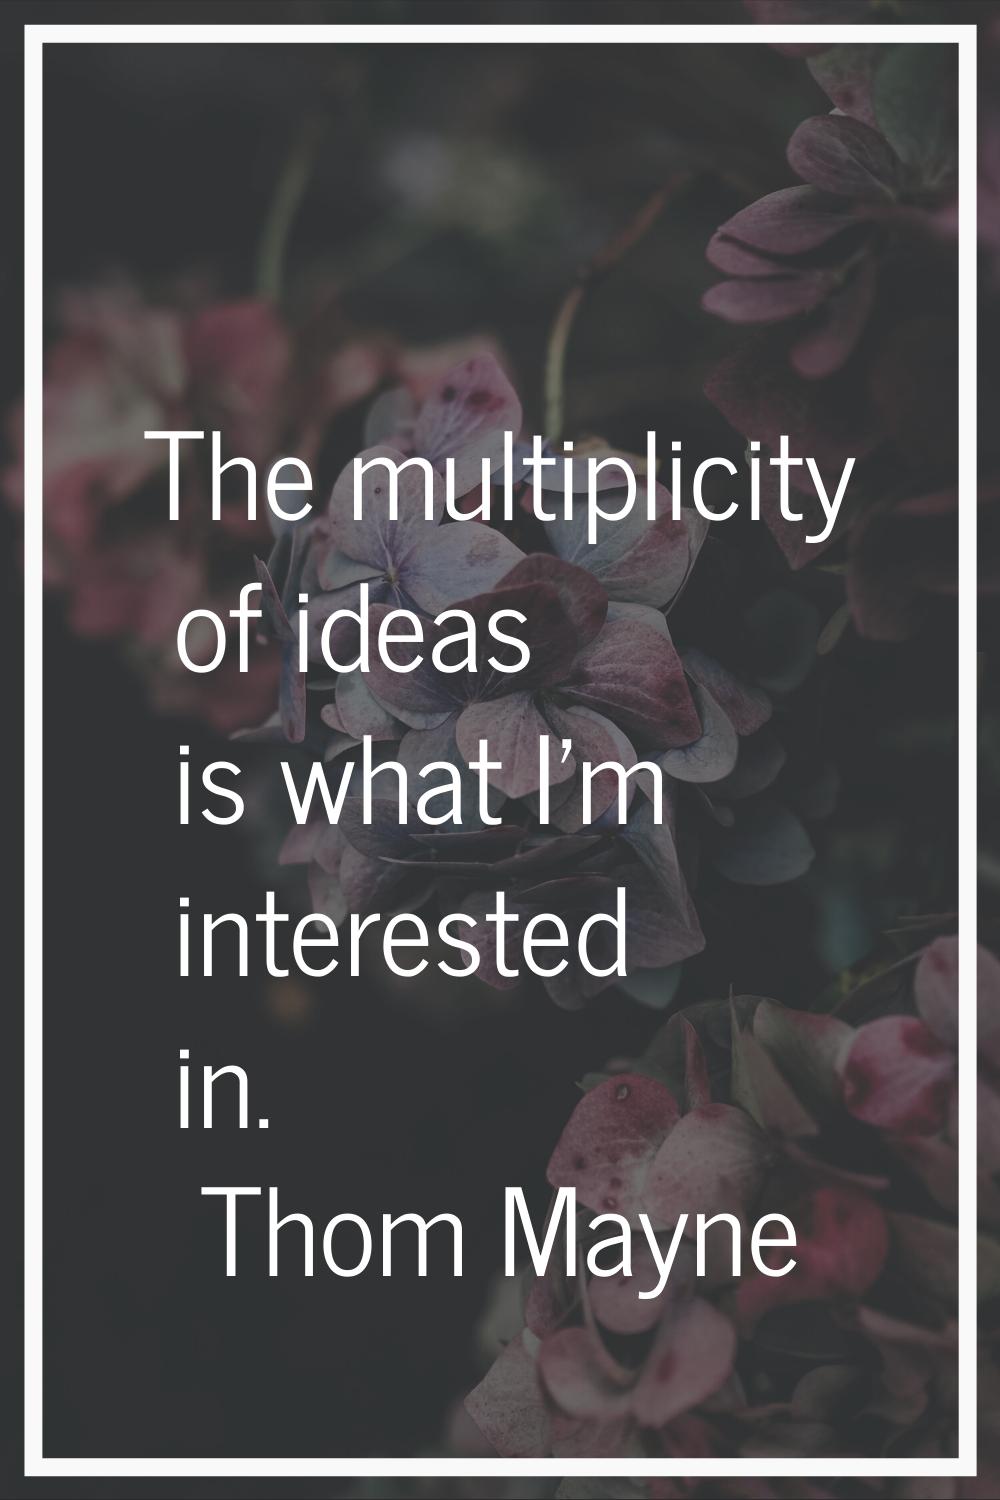 The multiplicity of ideas is what I'm interested in.